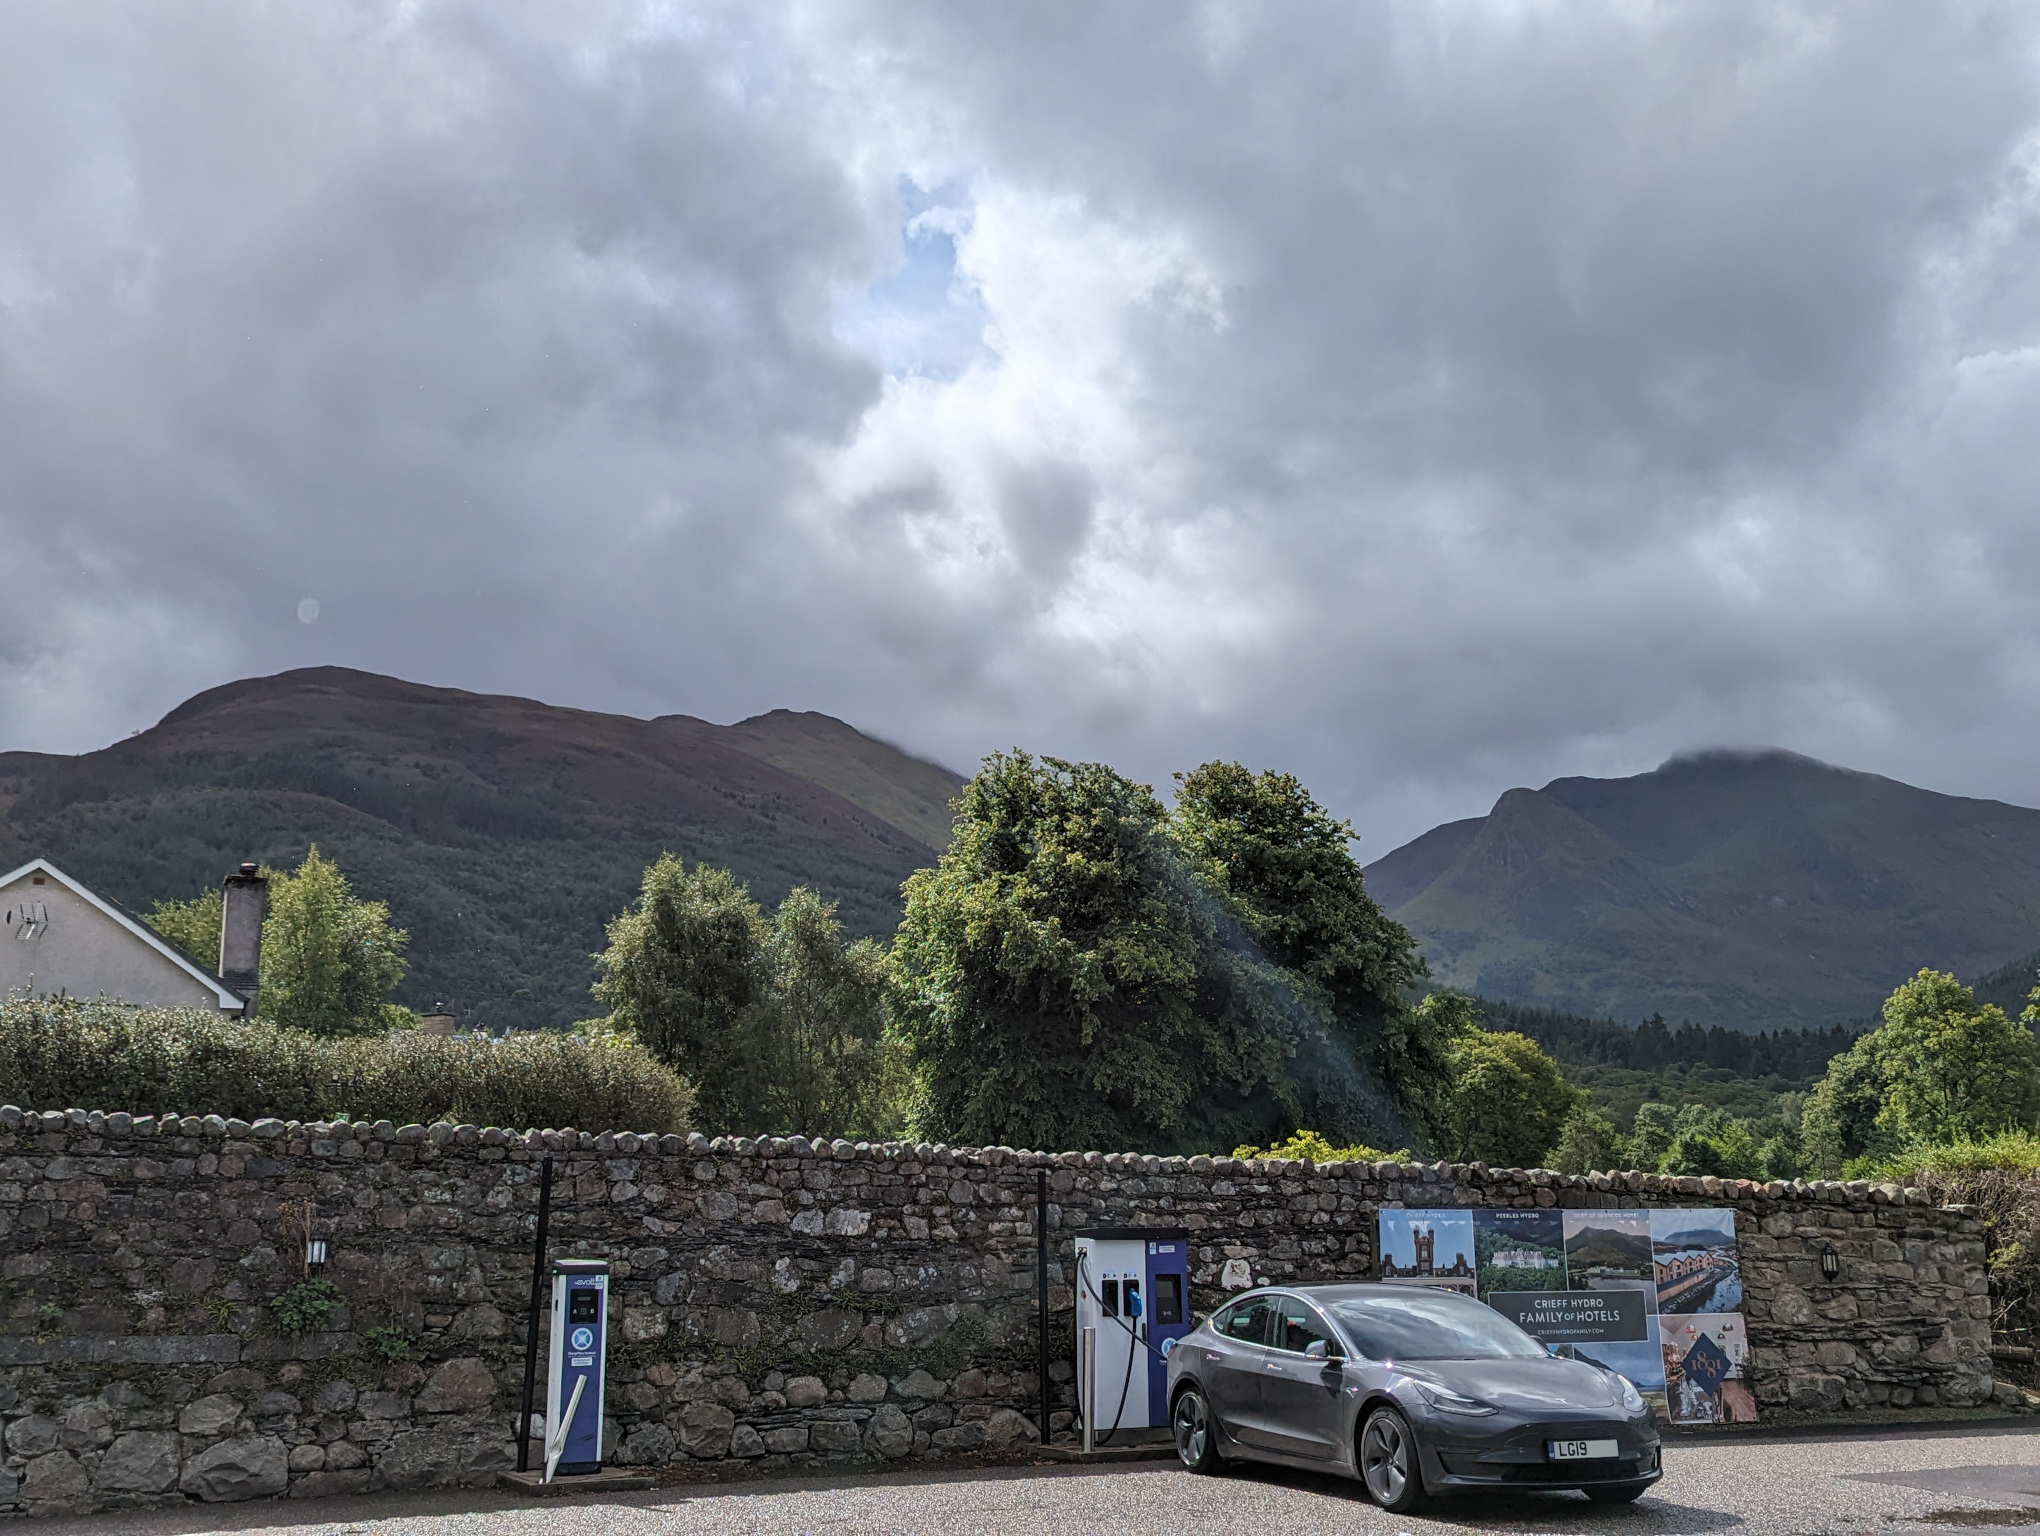 Chargeplace Scotland at Ballachulish Hotel, with view towards Glencoe